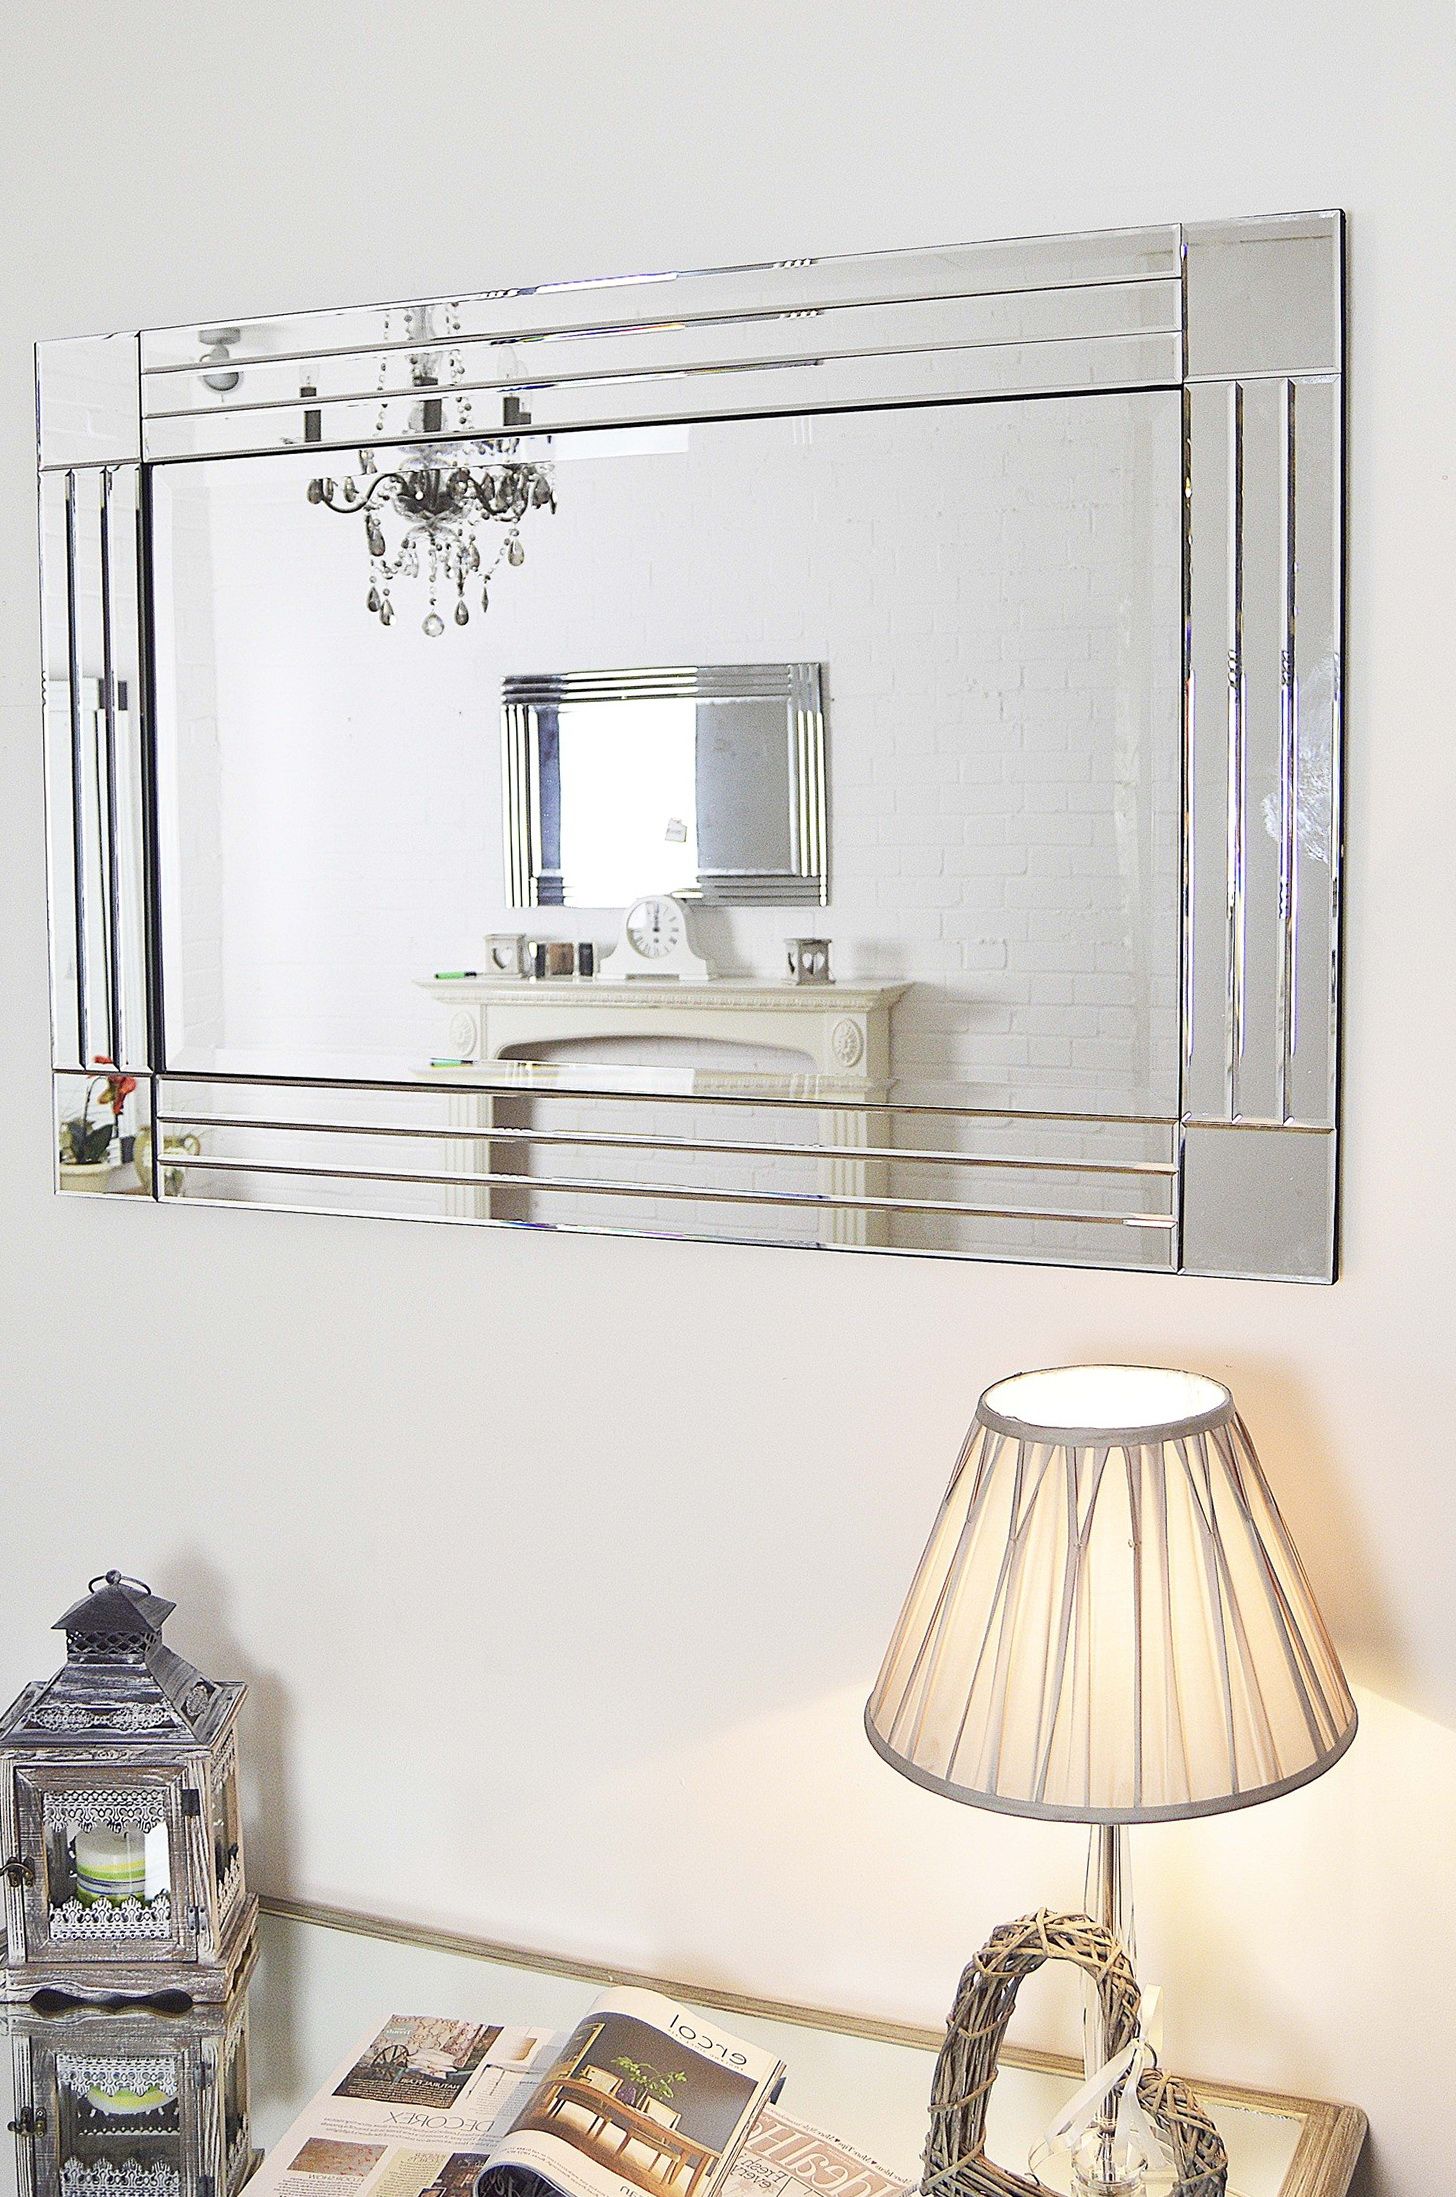 Large Frameless Beveled Mirror | Home Design Ideas Throughout Tetbury Frameless Tri Bevel Wall Mirrors (View 5 of 15)